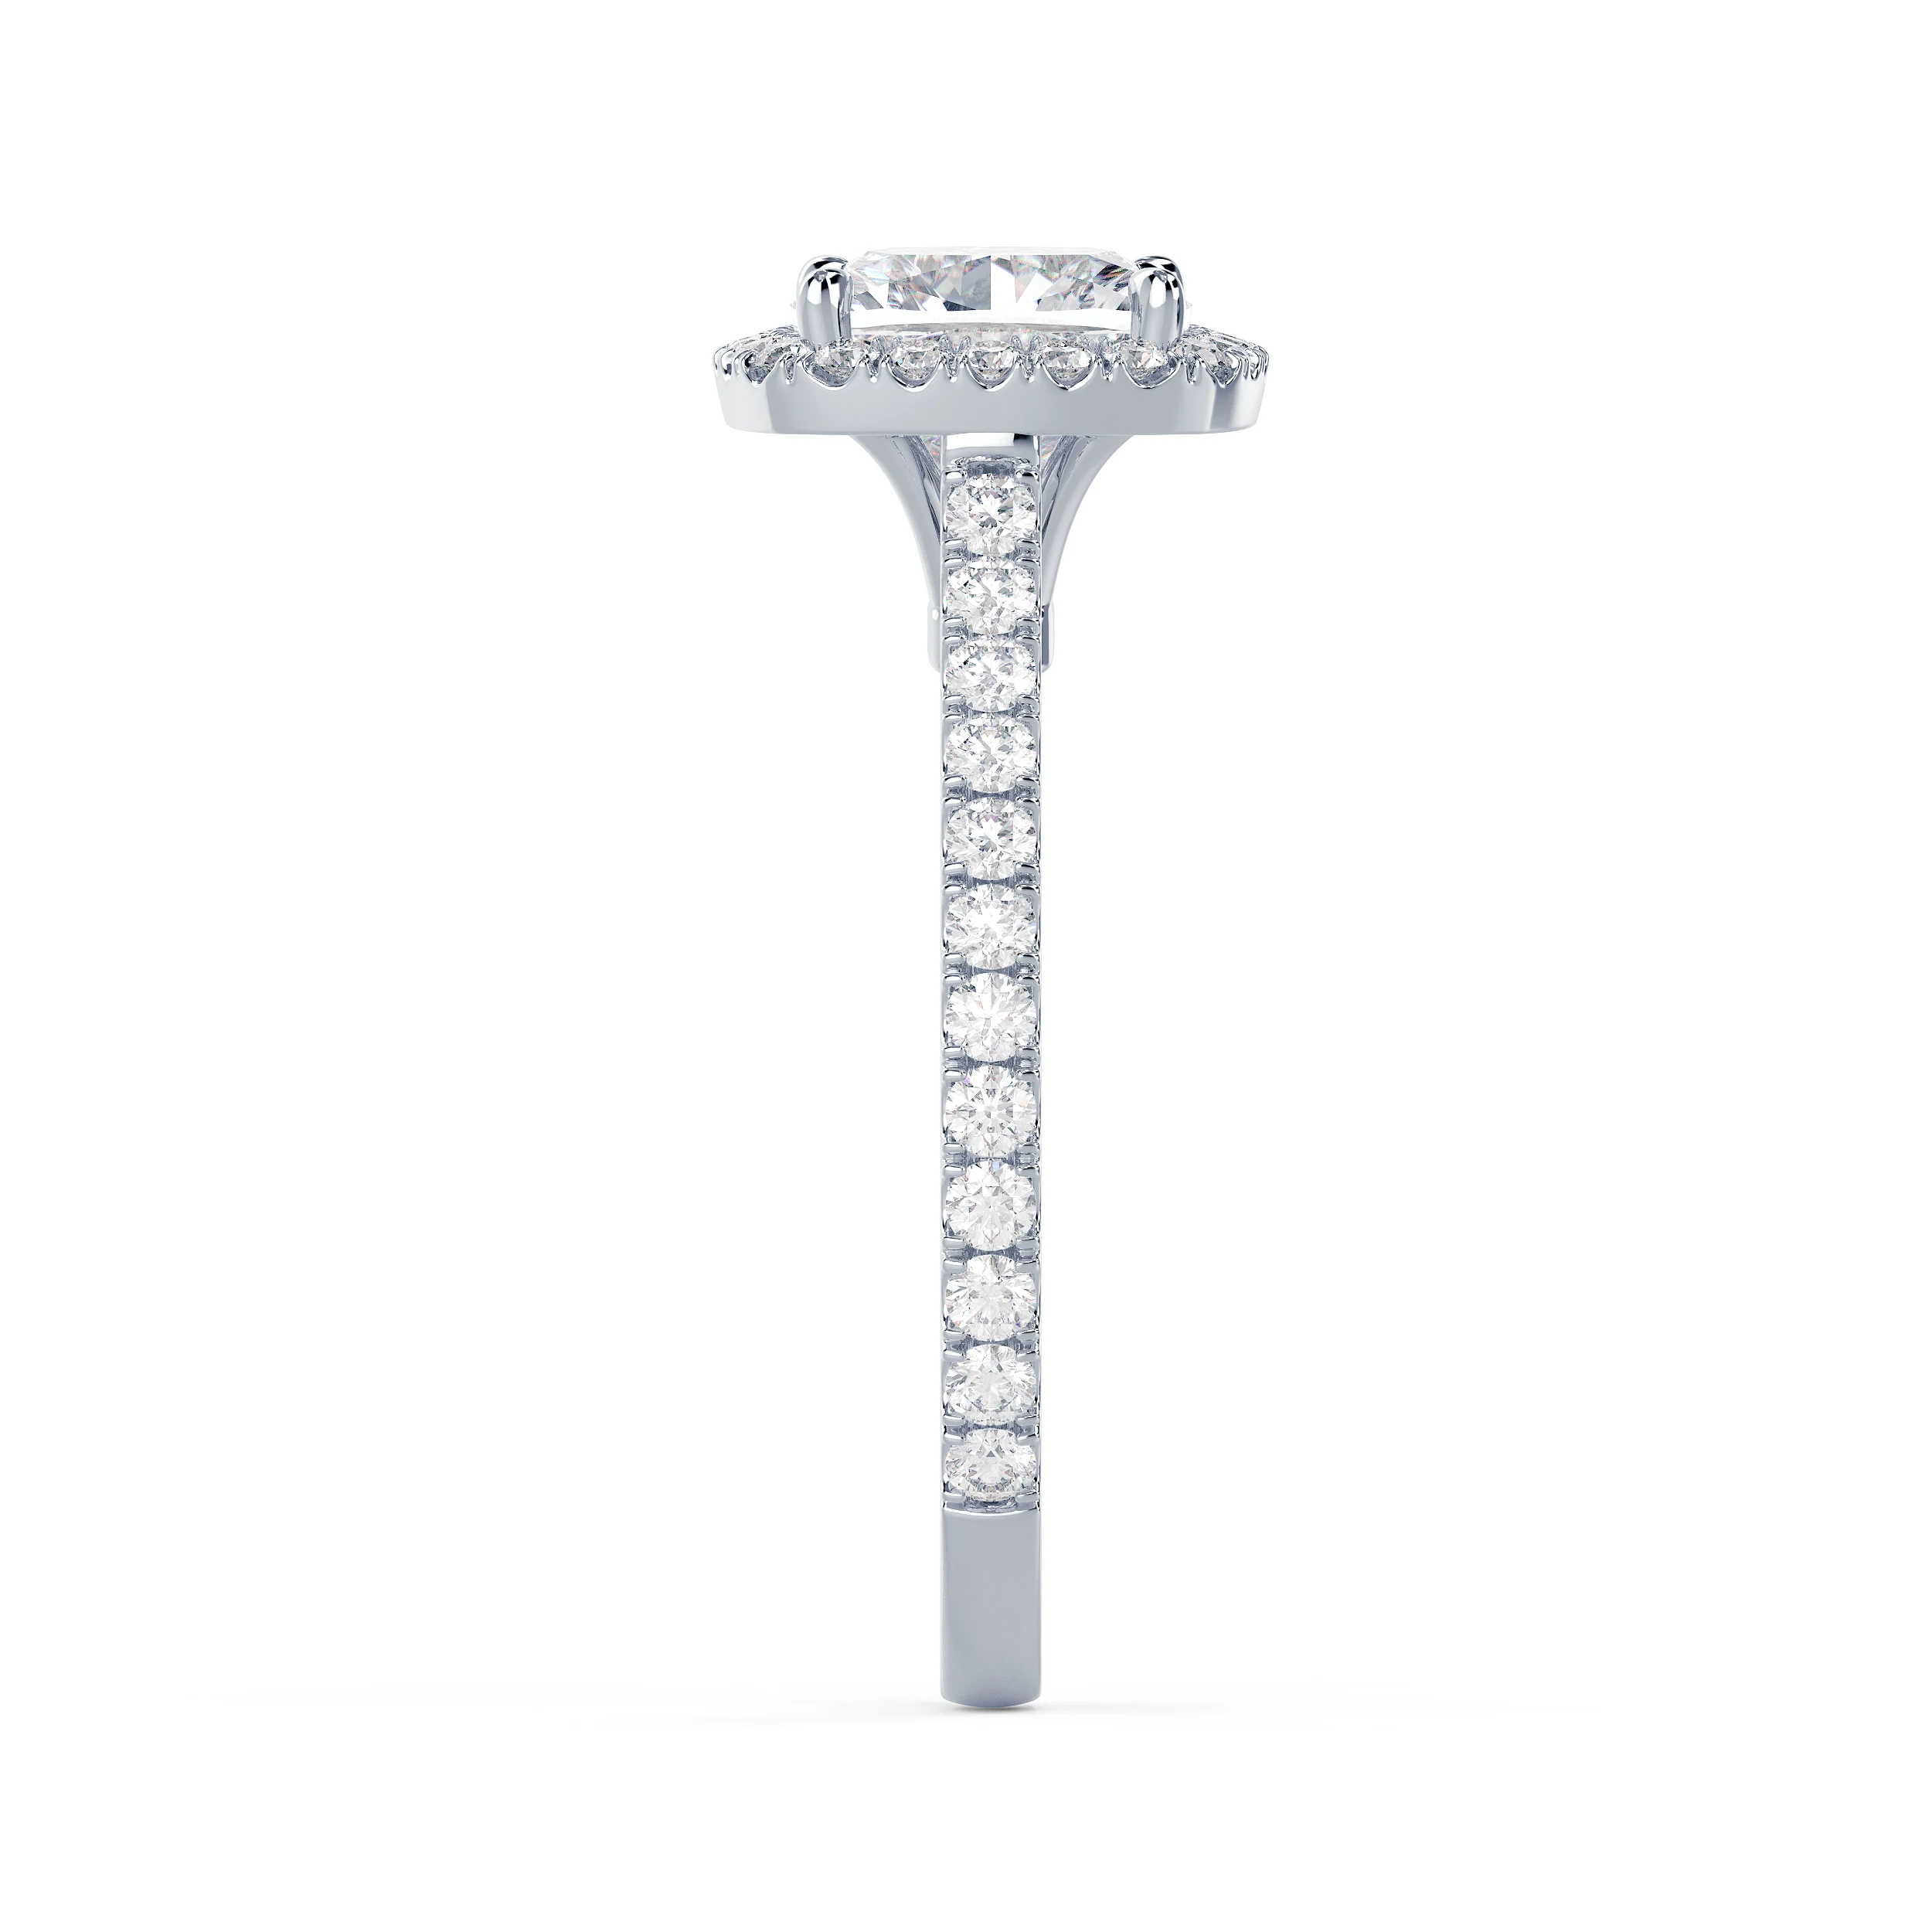 White Gold Cushion Halo Pavé Setting featuring Man Made Diamonds (Side View)